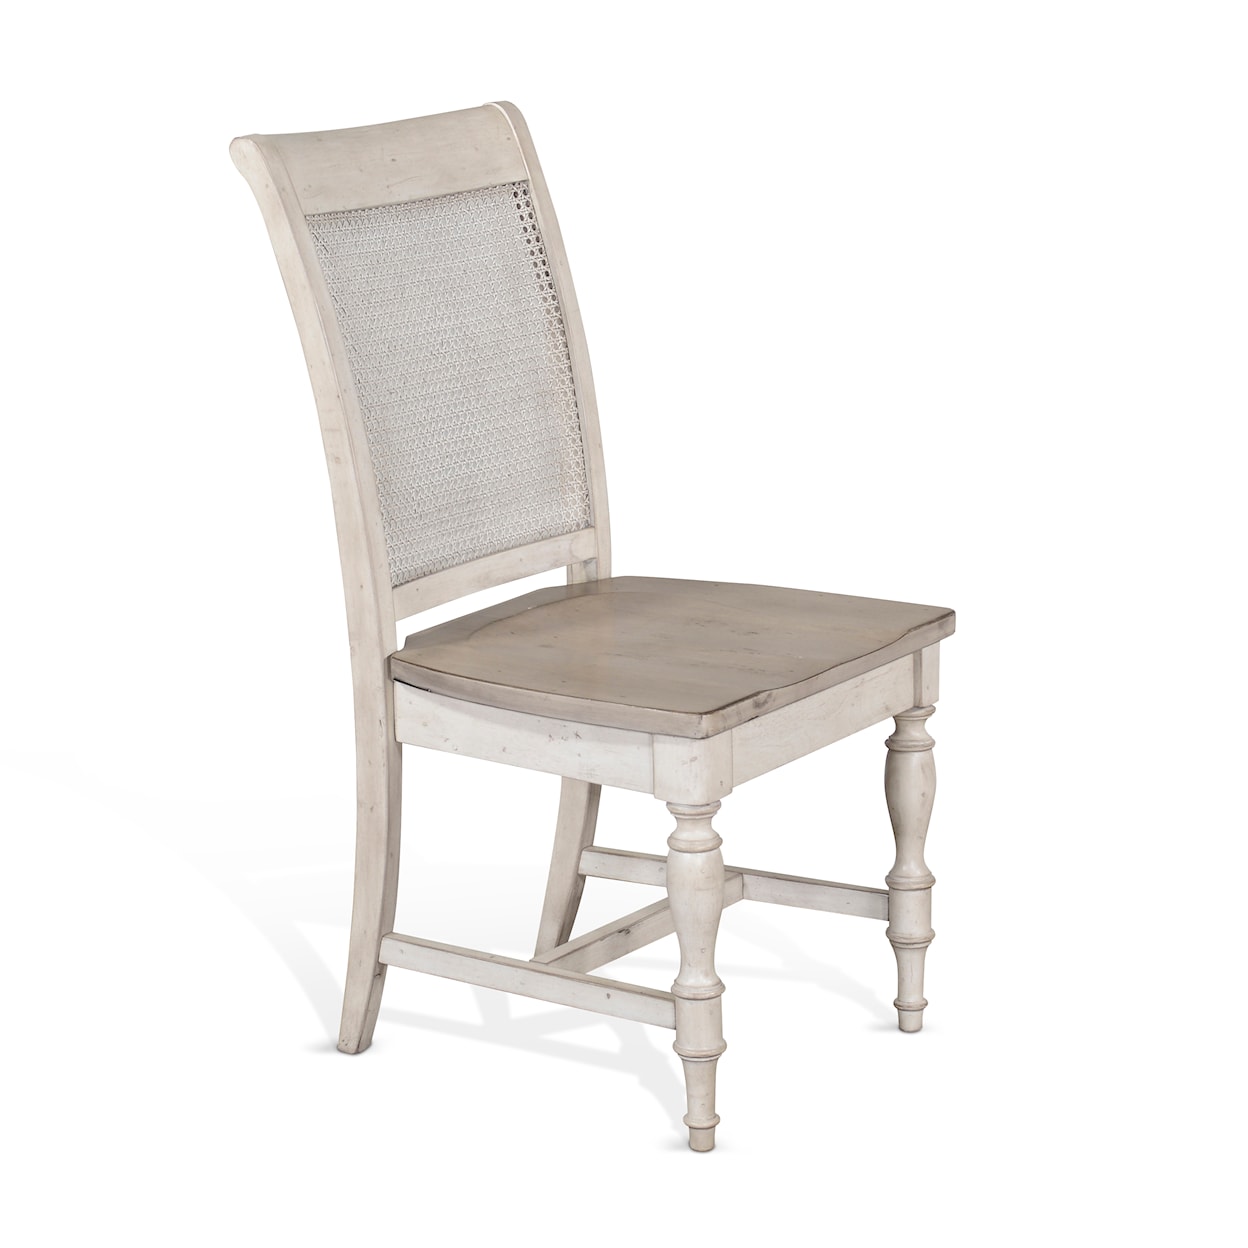 Sunny Designs Westwood Village Caneback Chair, Wood Seat